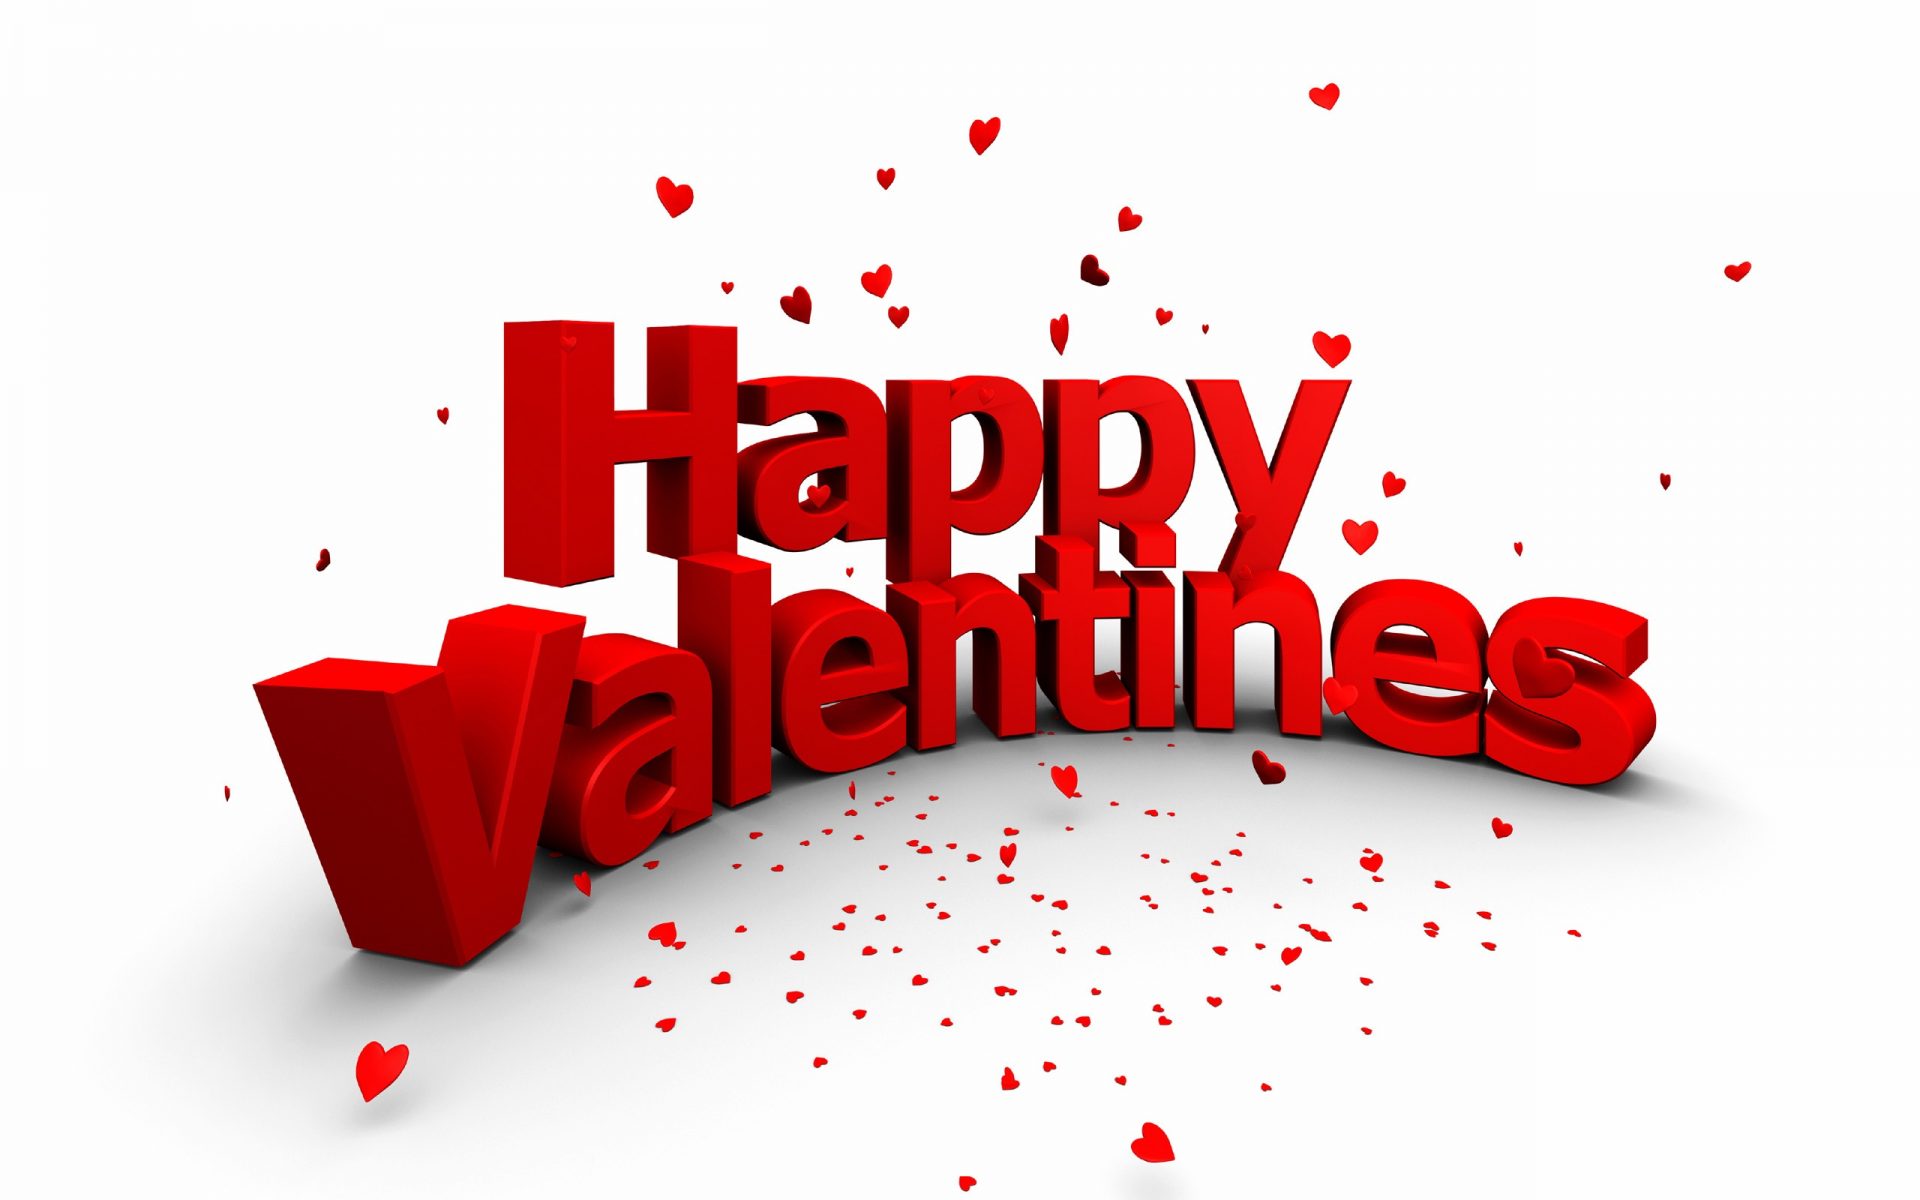 14th february valentine's day sms